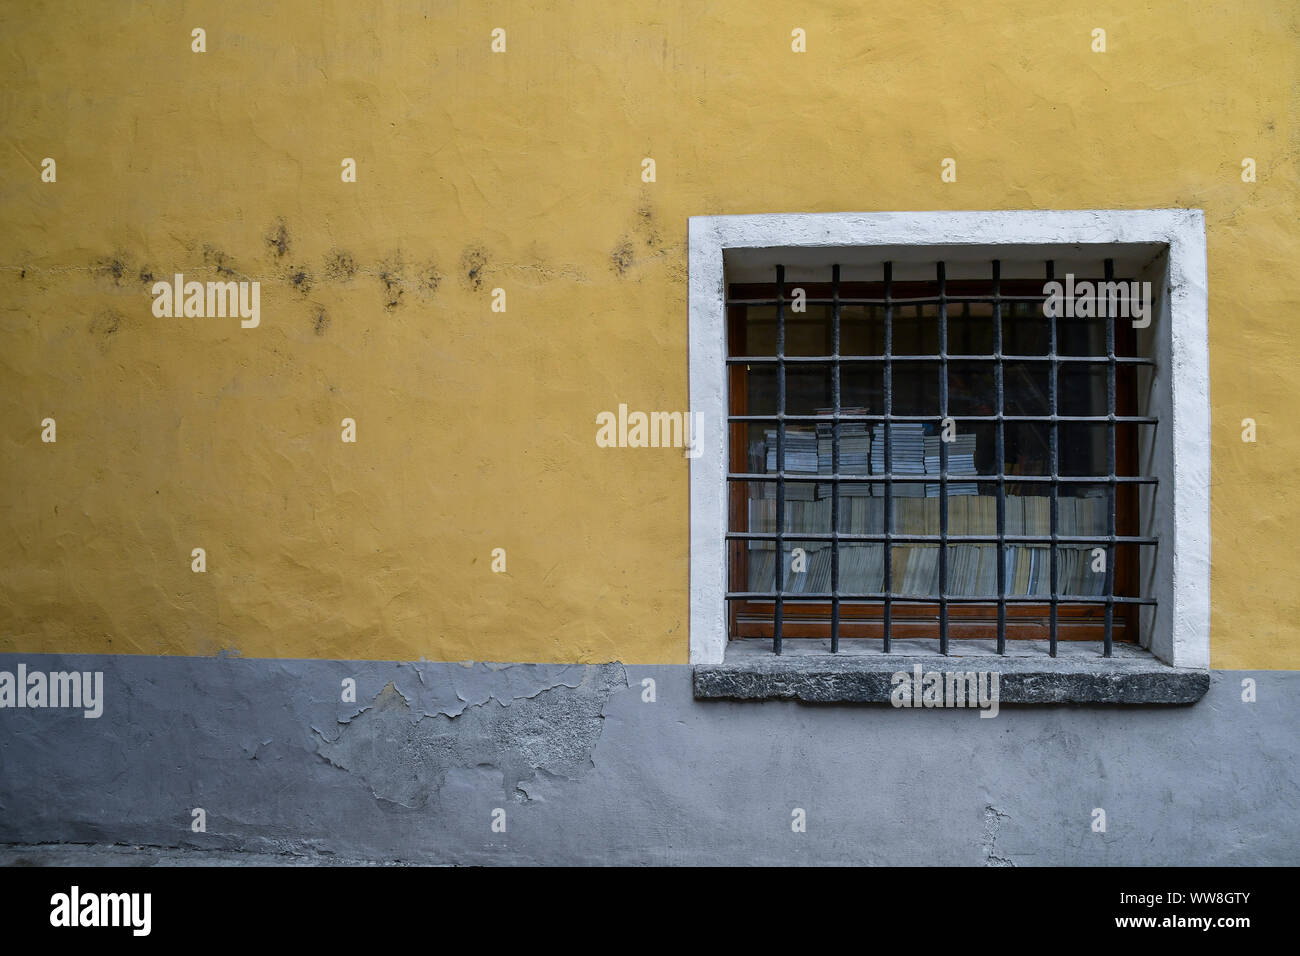 Close-up of the small window of an old building with iron bars, stacks of books behind the glass and yellow and gray wall, Aosta, Aosta Valley, Italy Stock Photo